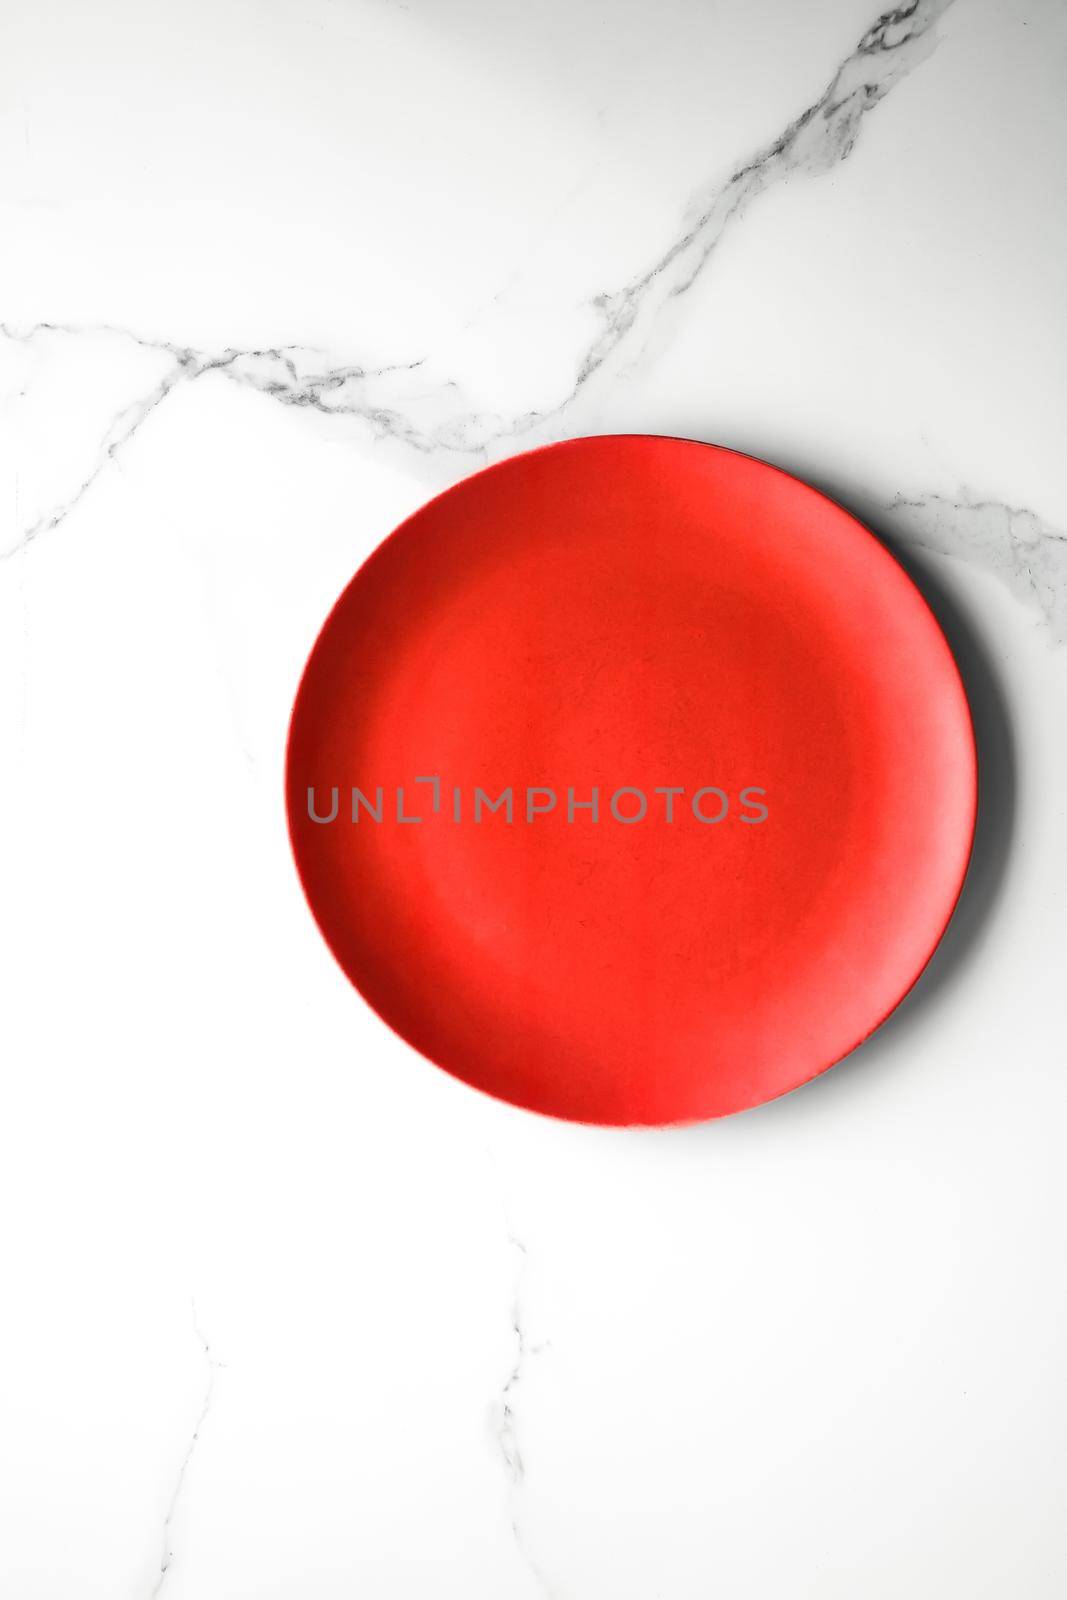 empty red plate on marble - recipe and restaurant mockup flatlay styled concept